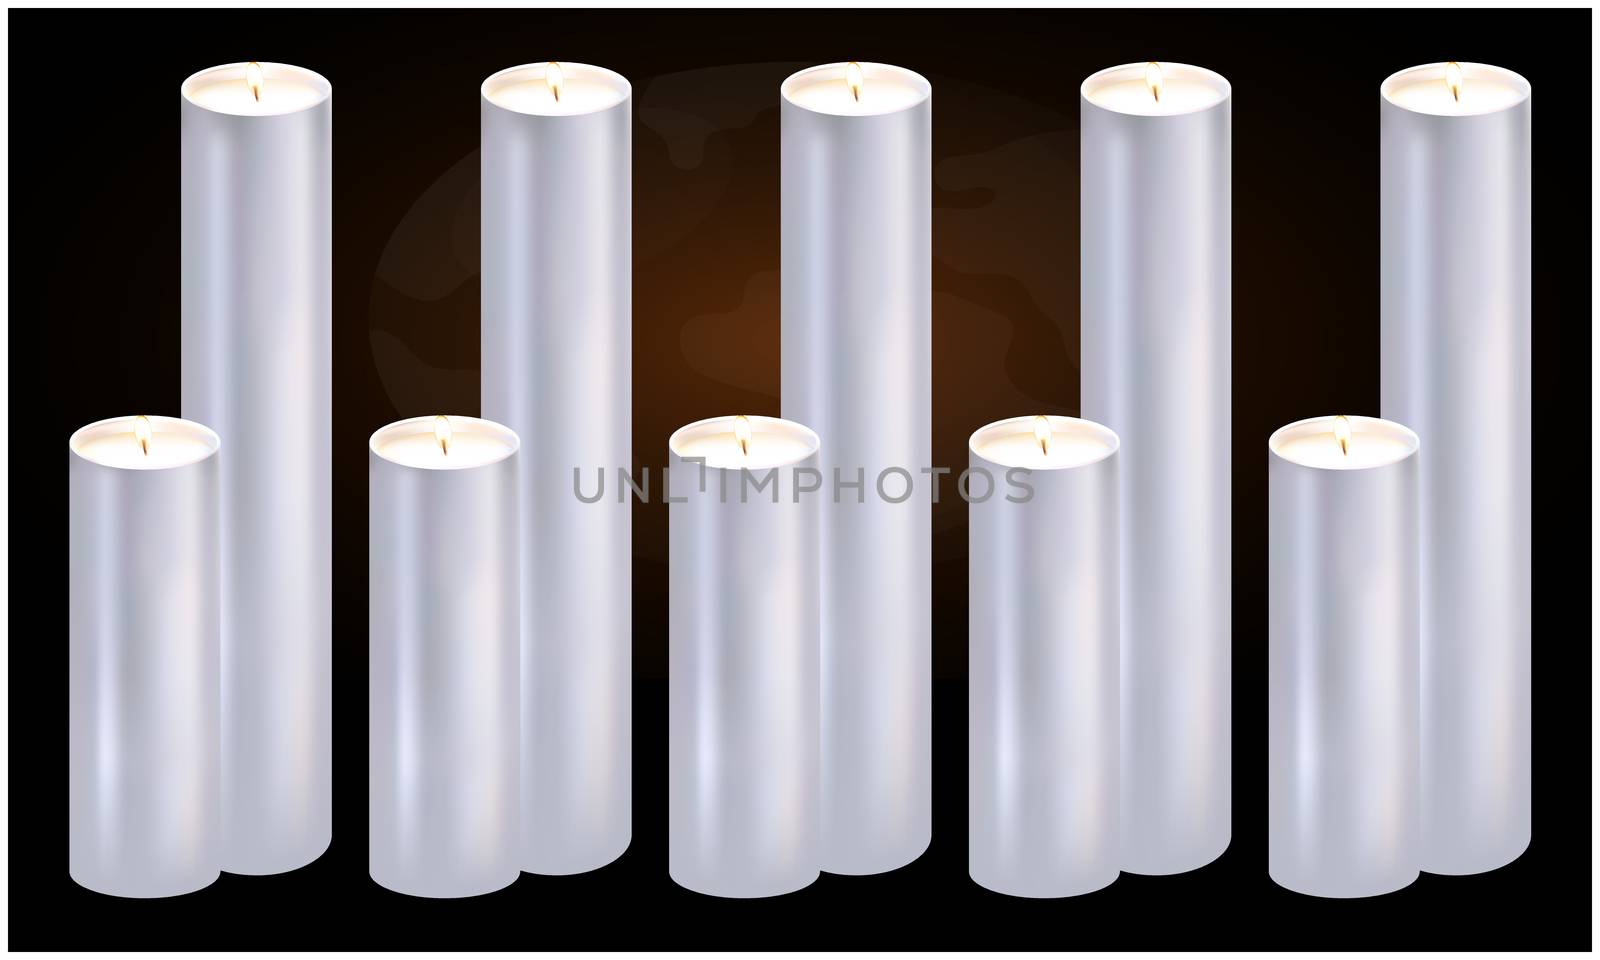 several burning candles on abstract dark backgrounds